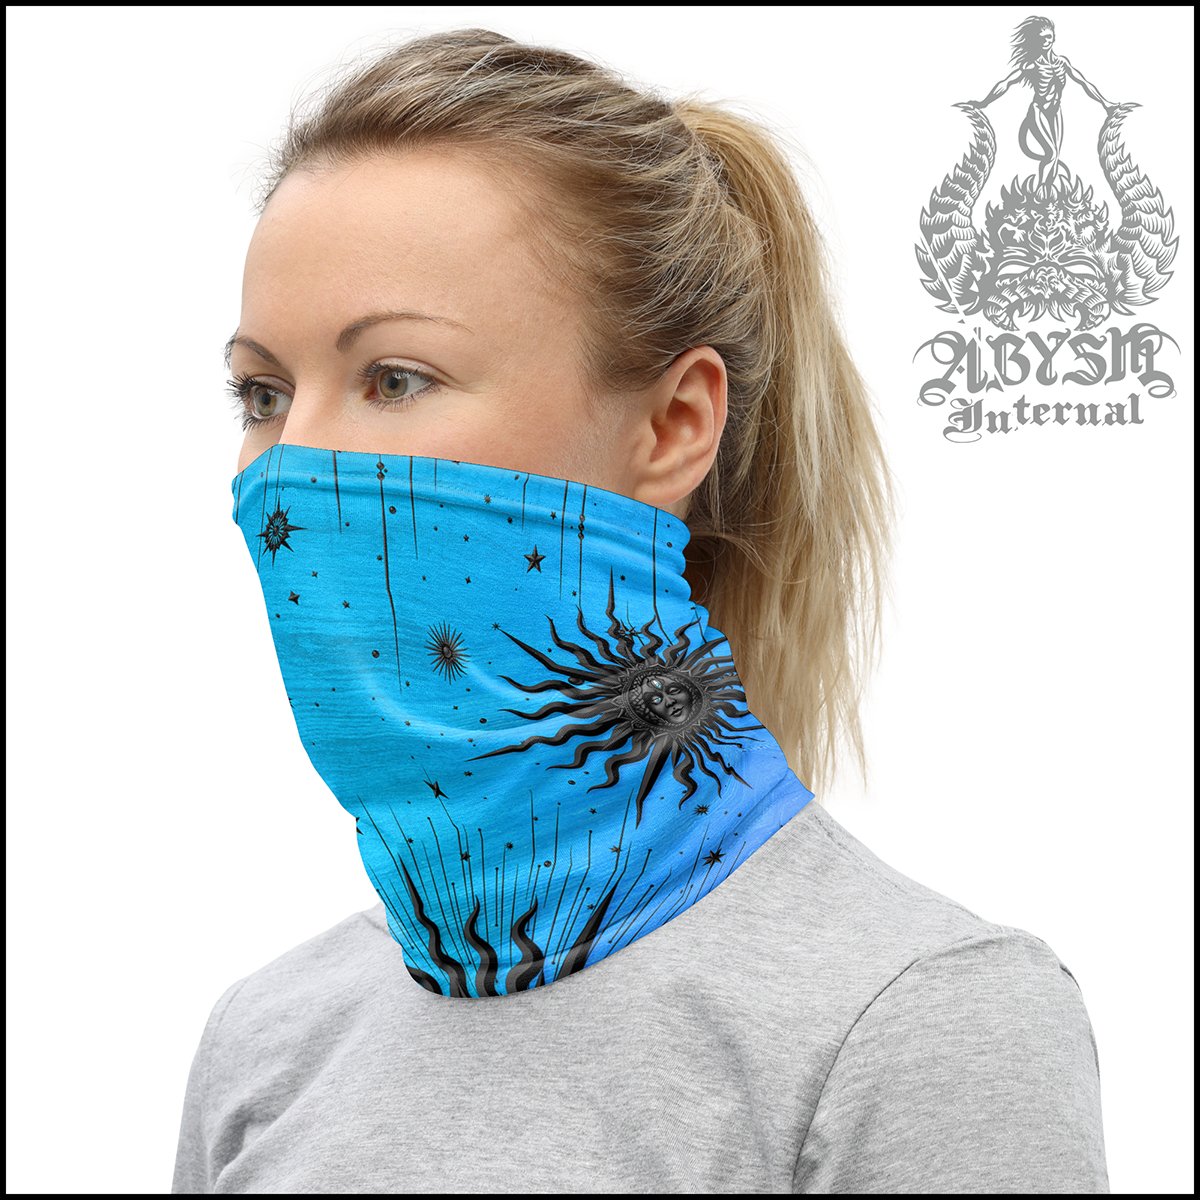 Witchy Neck Gaiter, Tarot Arcana Sun Face Mask, Printed Head Covering, Witch Outfit - Black, Cyan - Abysm Internal